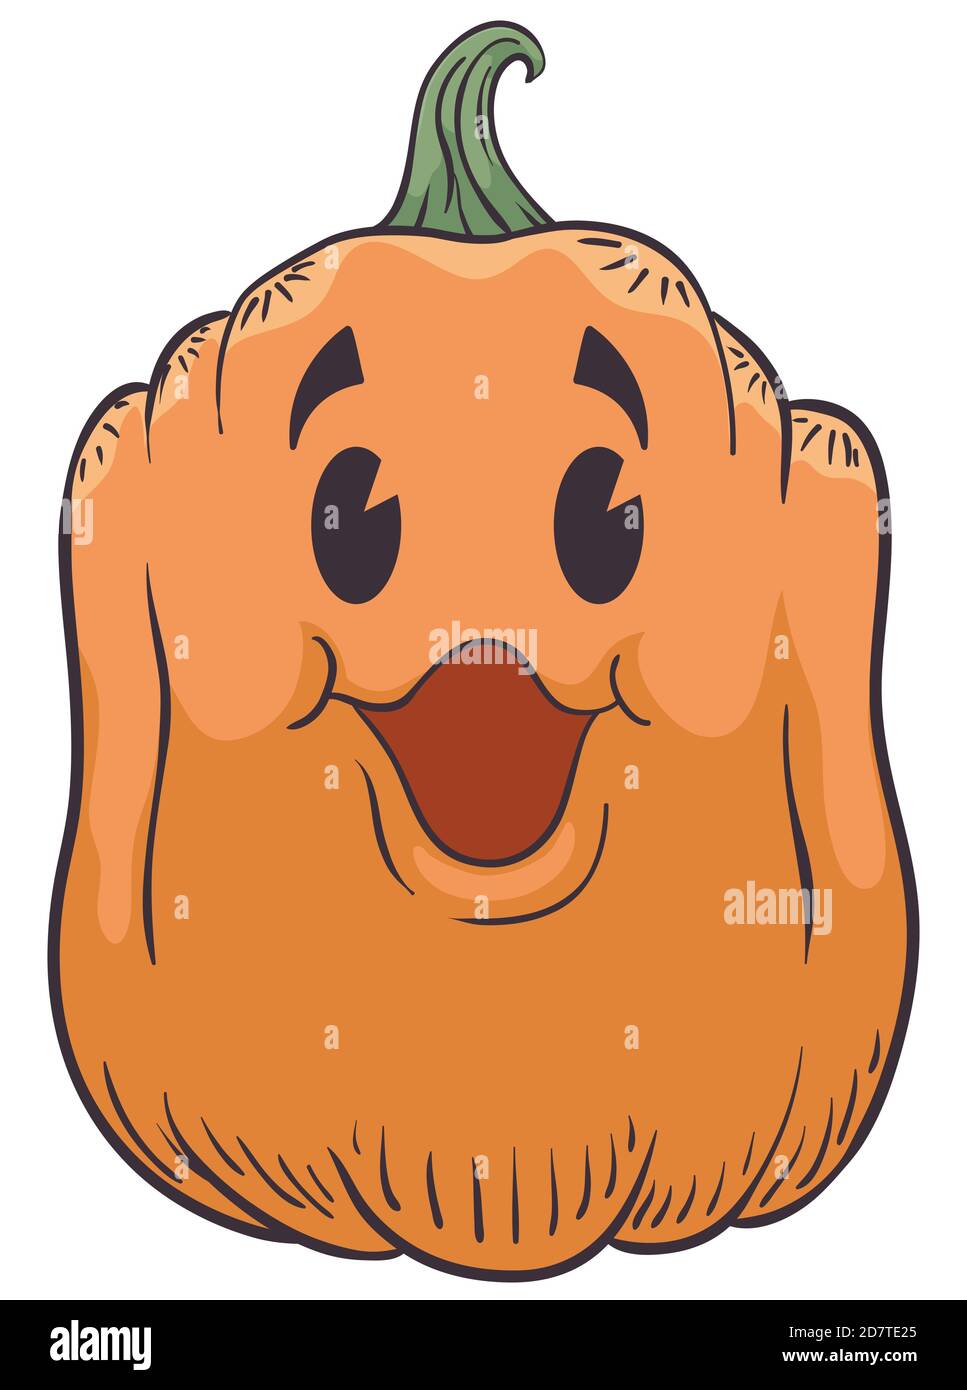 Tall pumpkin taking breath preparing for a special season of Halloween in outlines and retro style. Stock Vector